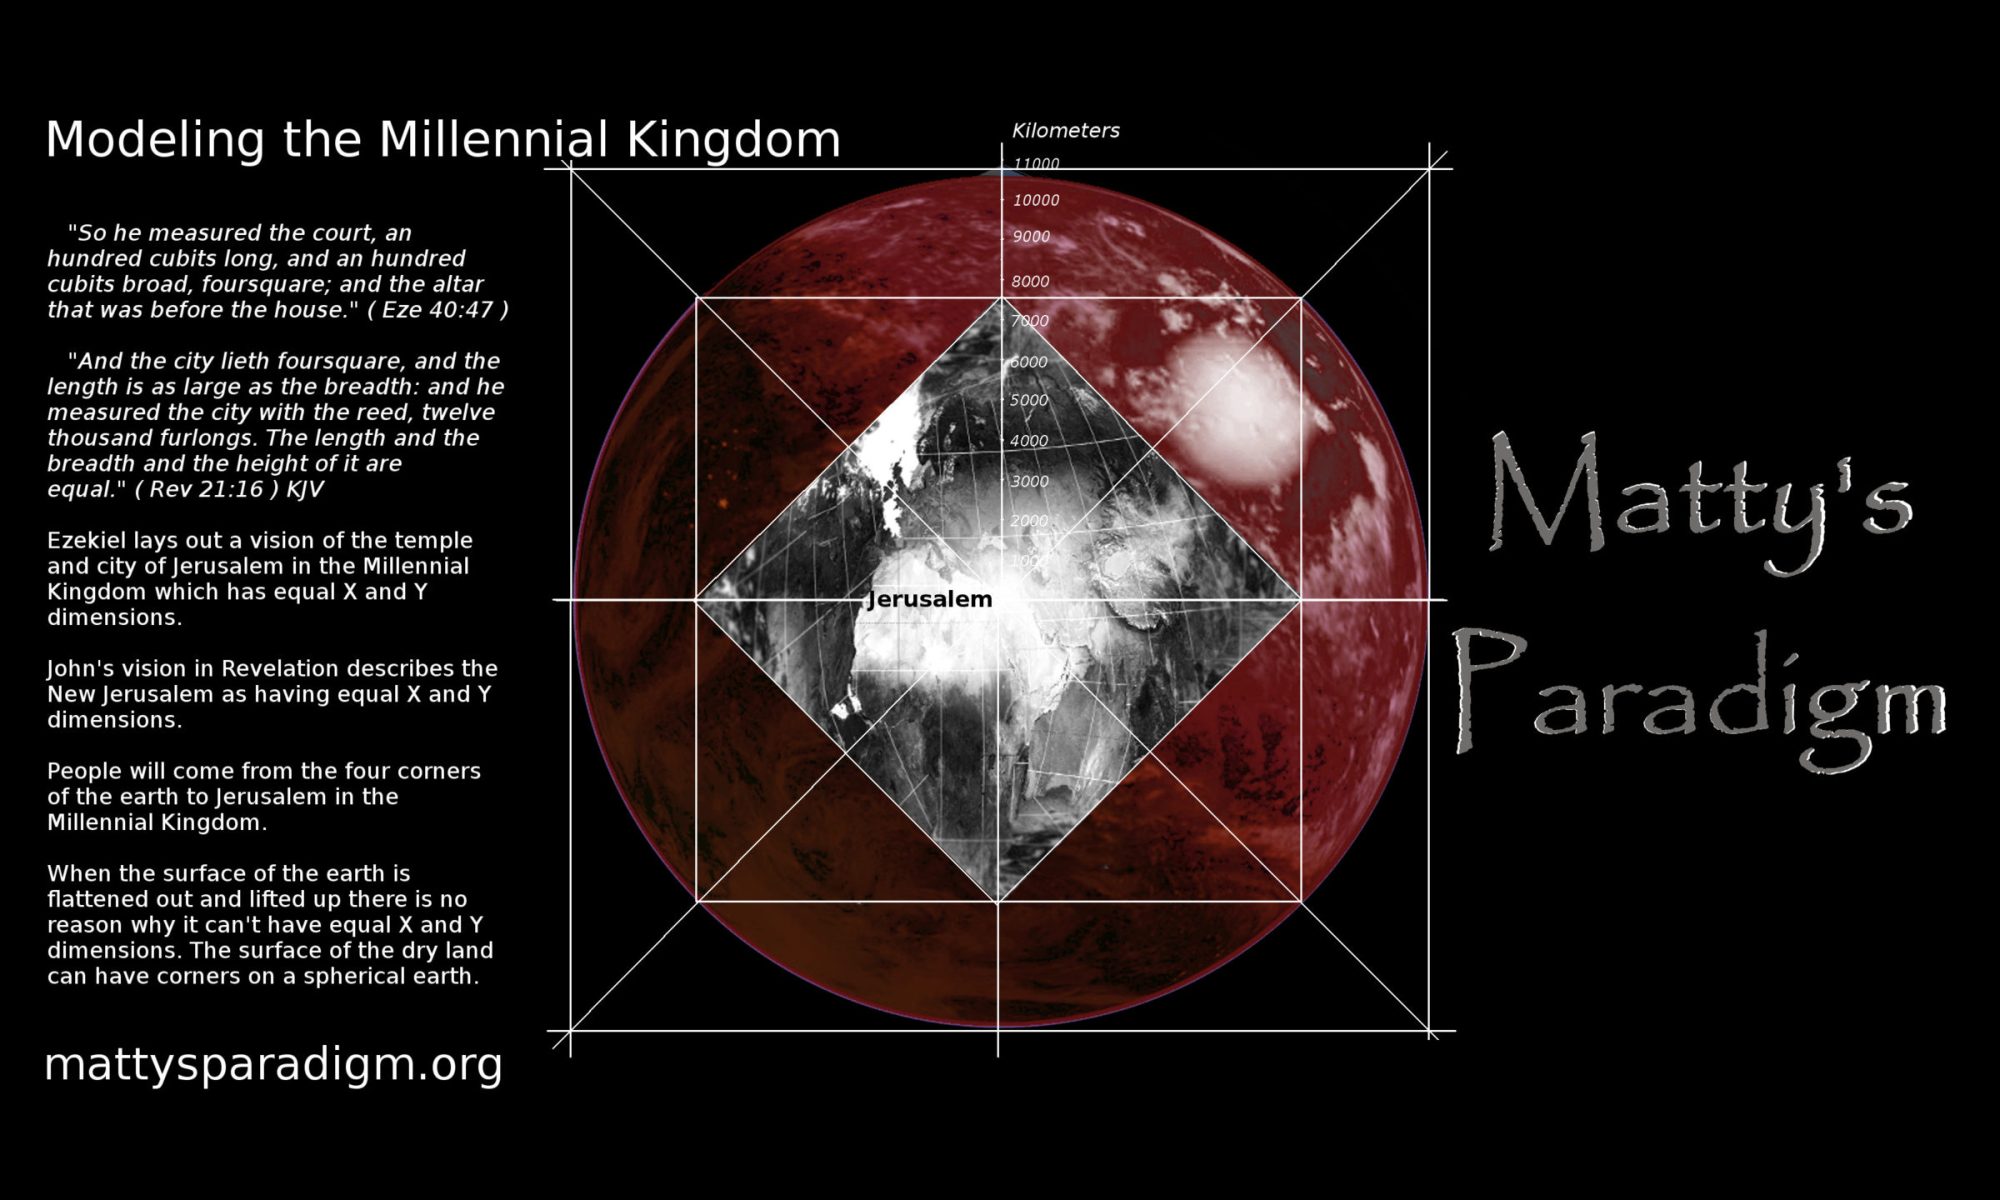 The phrase "the four corners of the earth" only occurs in the context of the millennial kingdom.